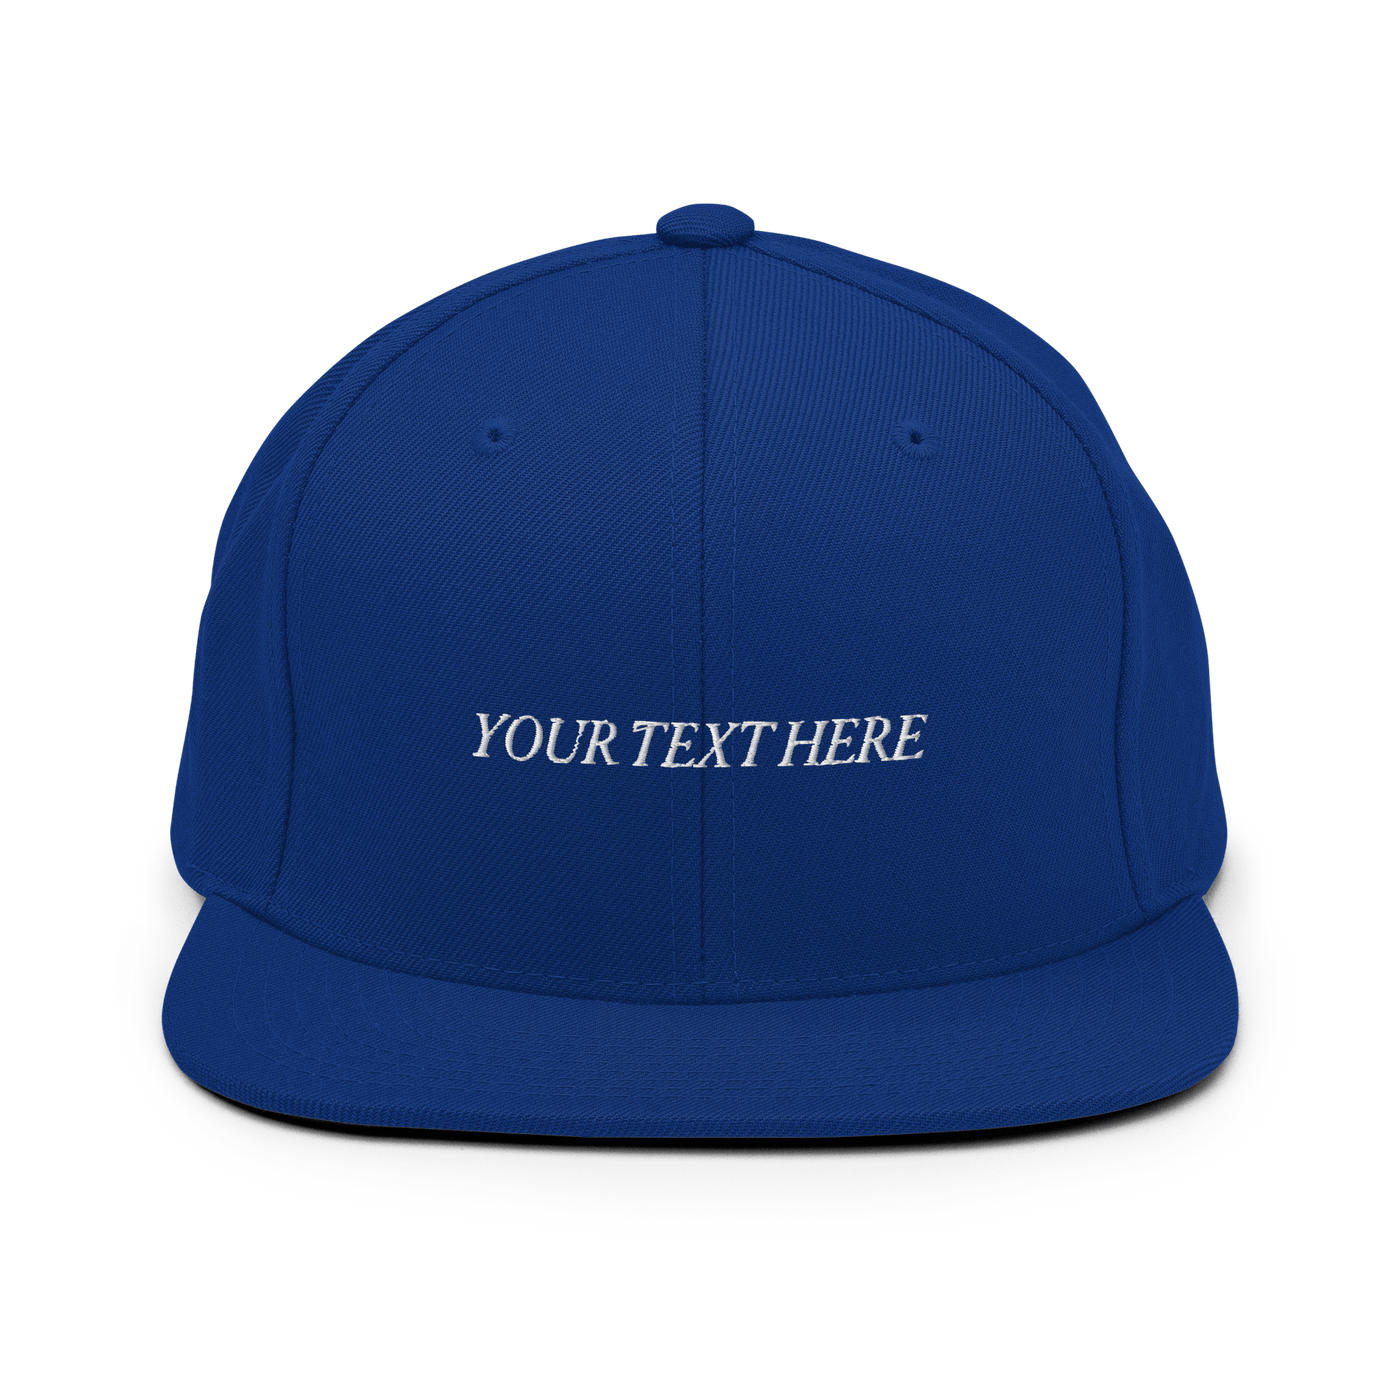 Customize Your Own Snapback Hat - Italic Font - Royal Blue - - Just Another Cap Store